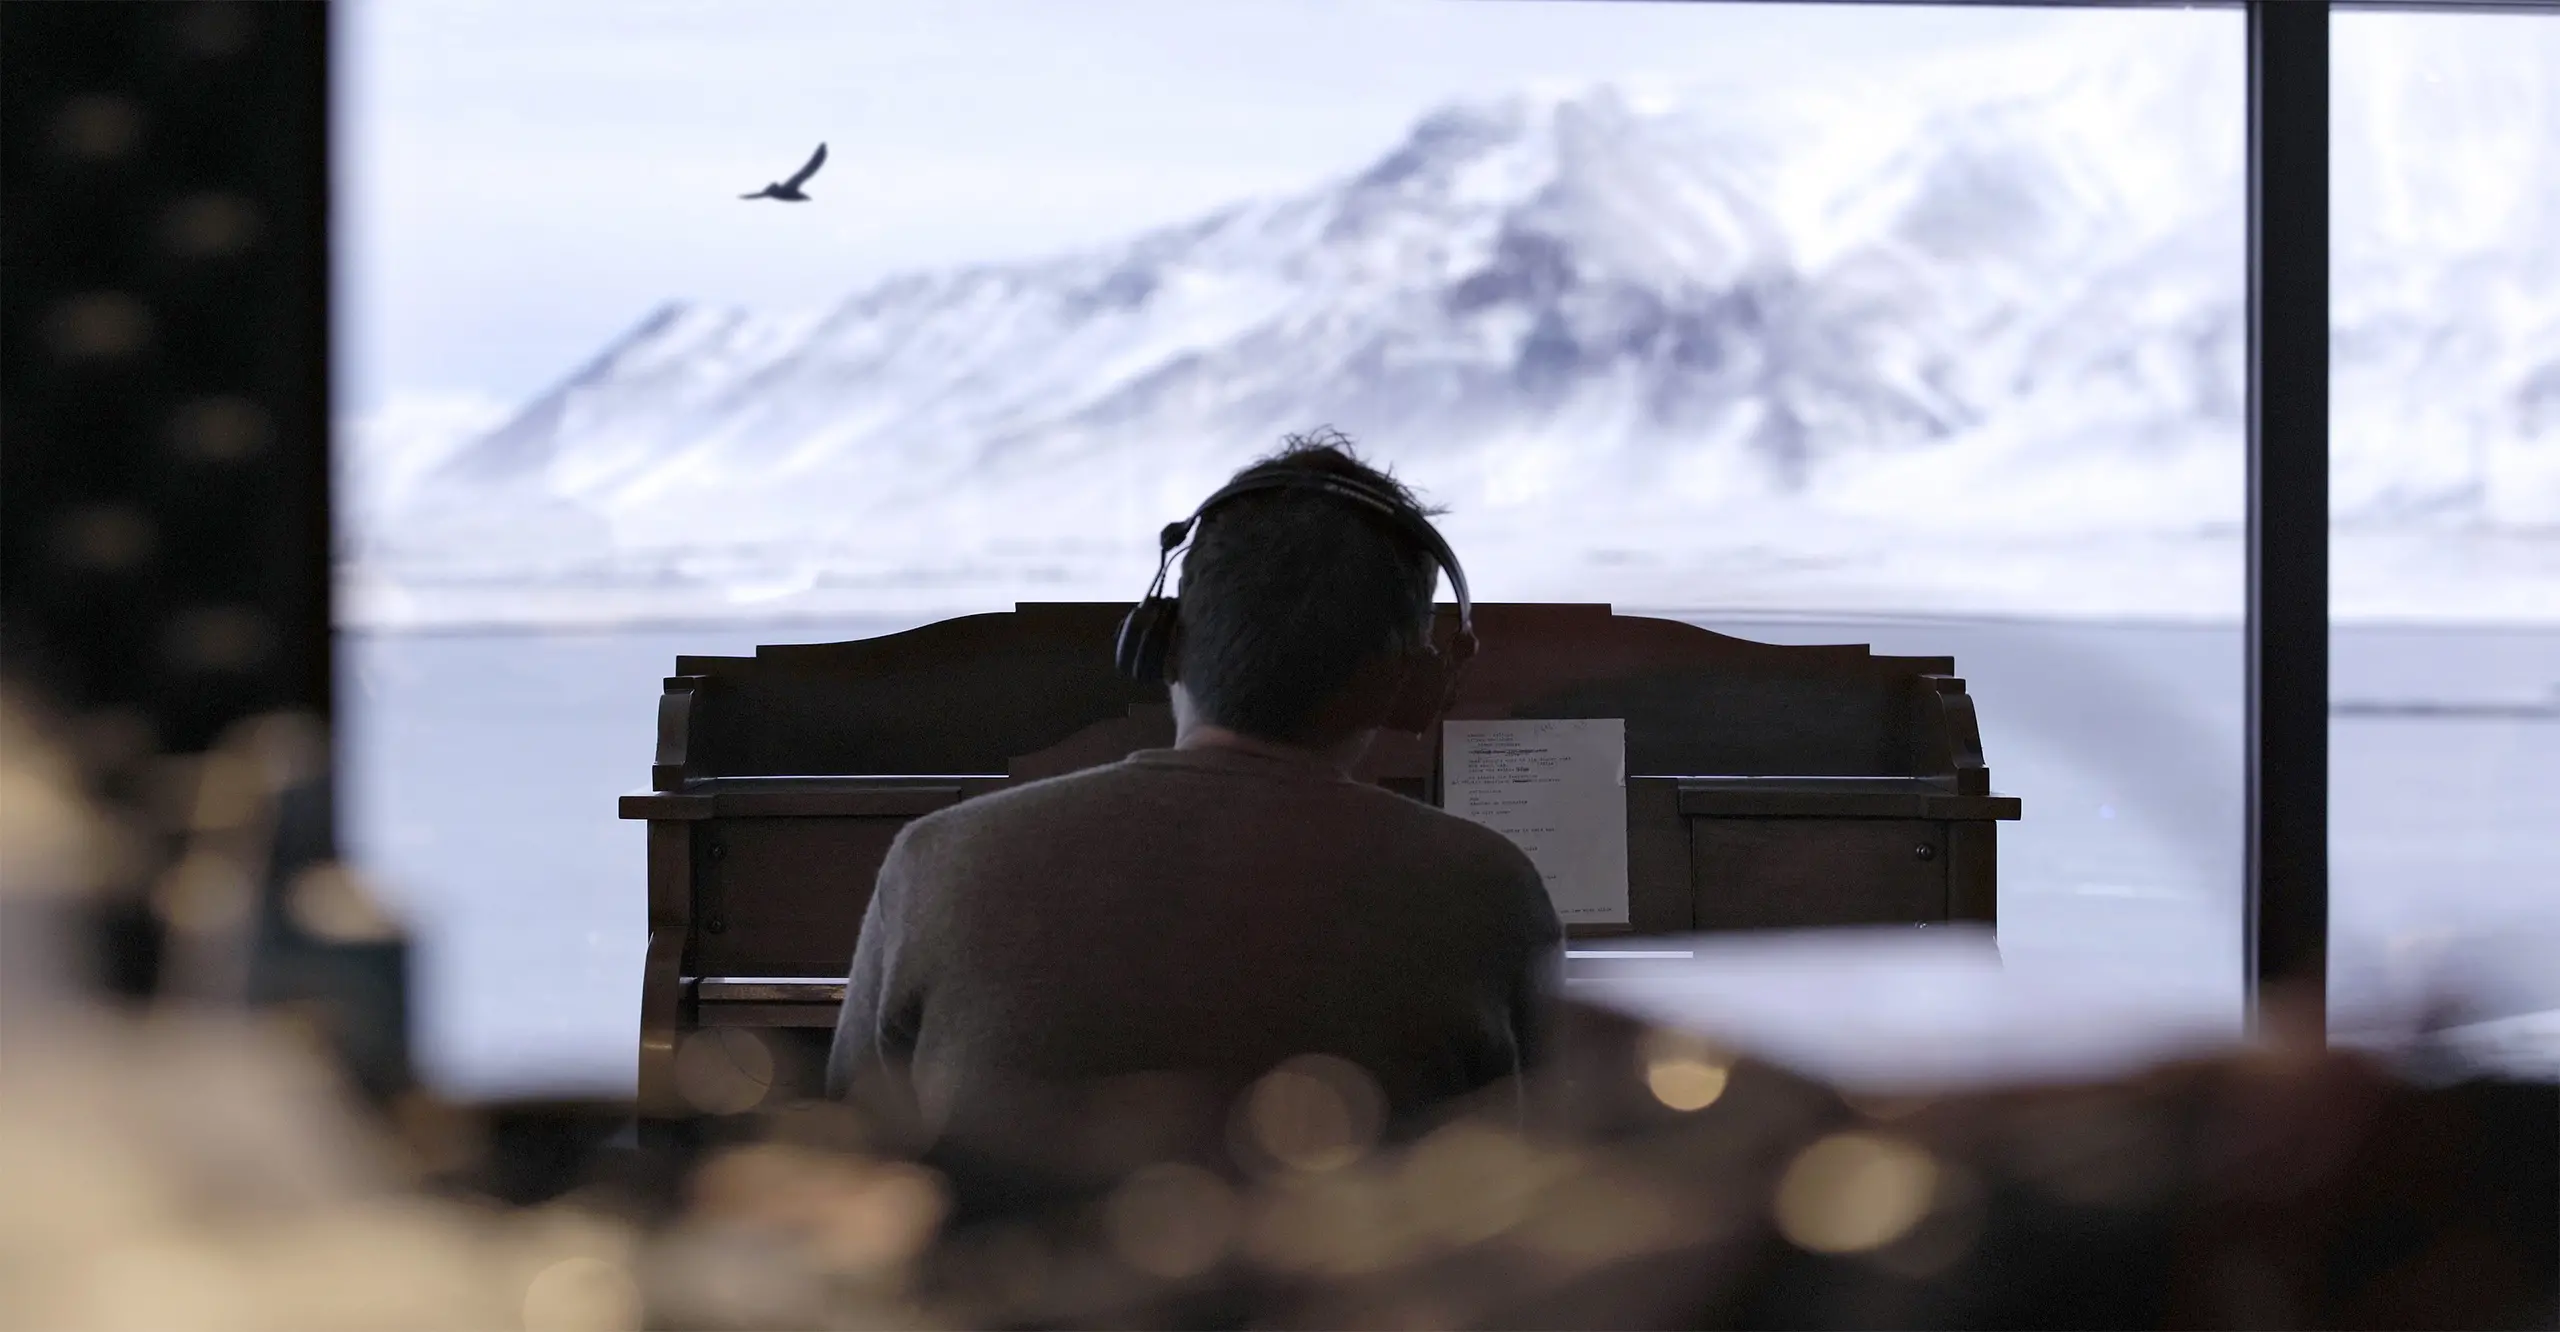 An image of the artist at his piano, with a mountain vista in the background